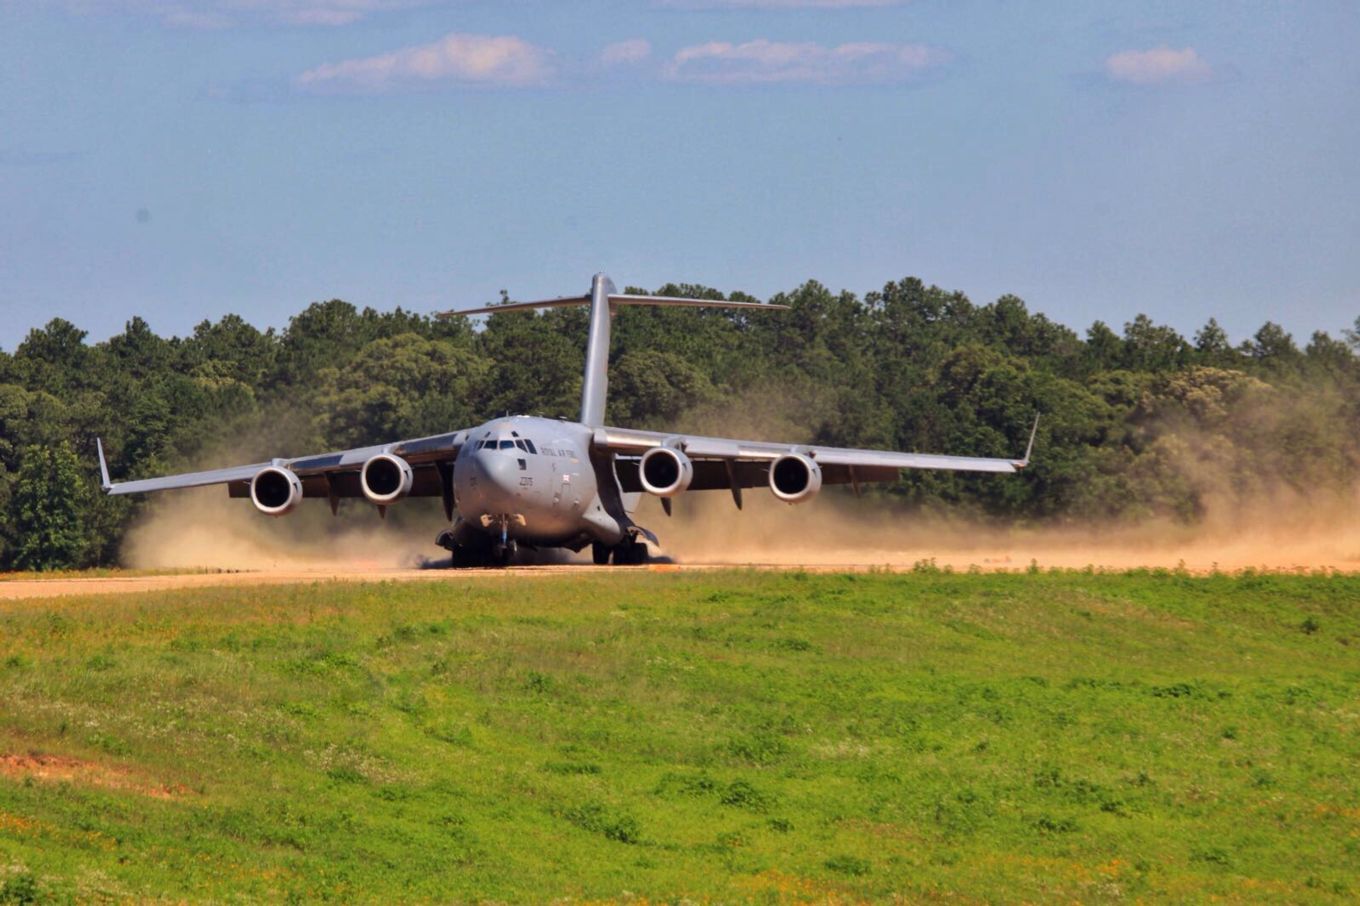 99 Squadron took the next step in developing the aircraft’s Semi Prepared Runway Operations (SPRO) capability during training based in Louisiana, USA. 